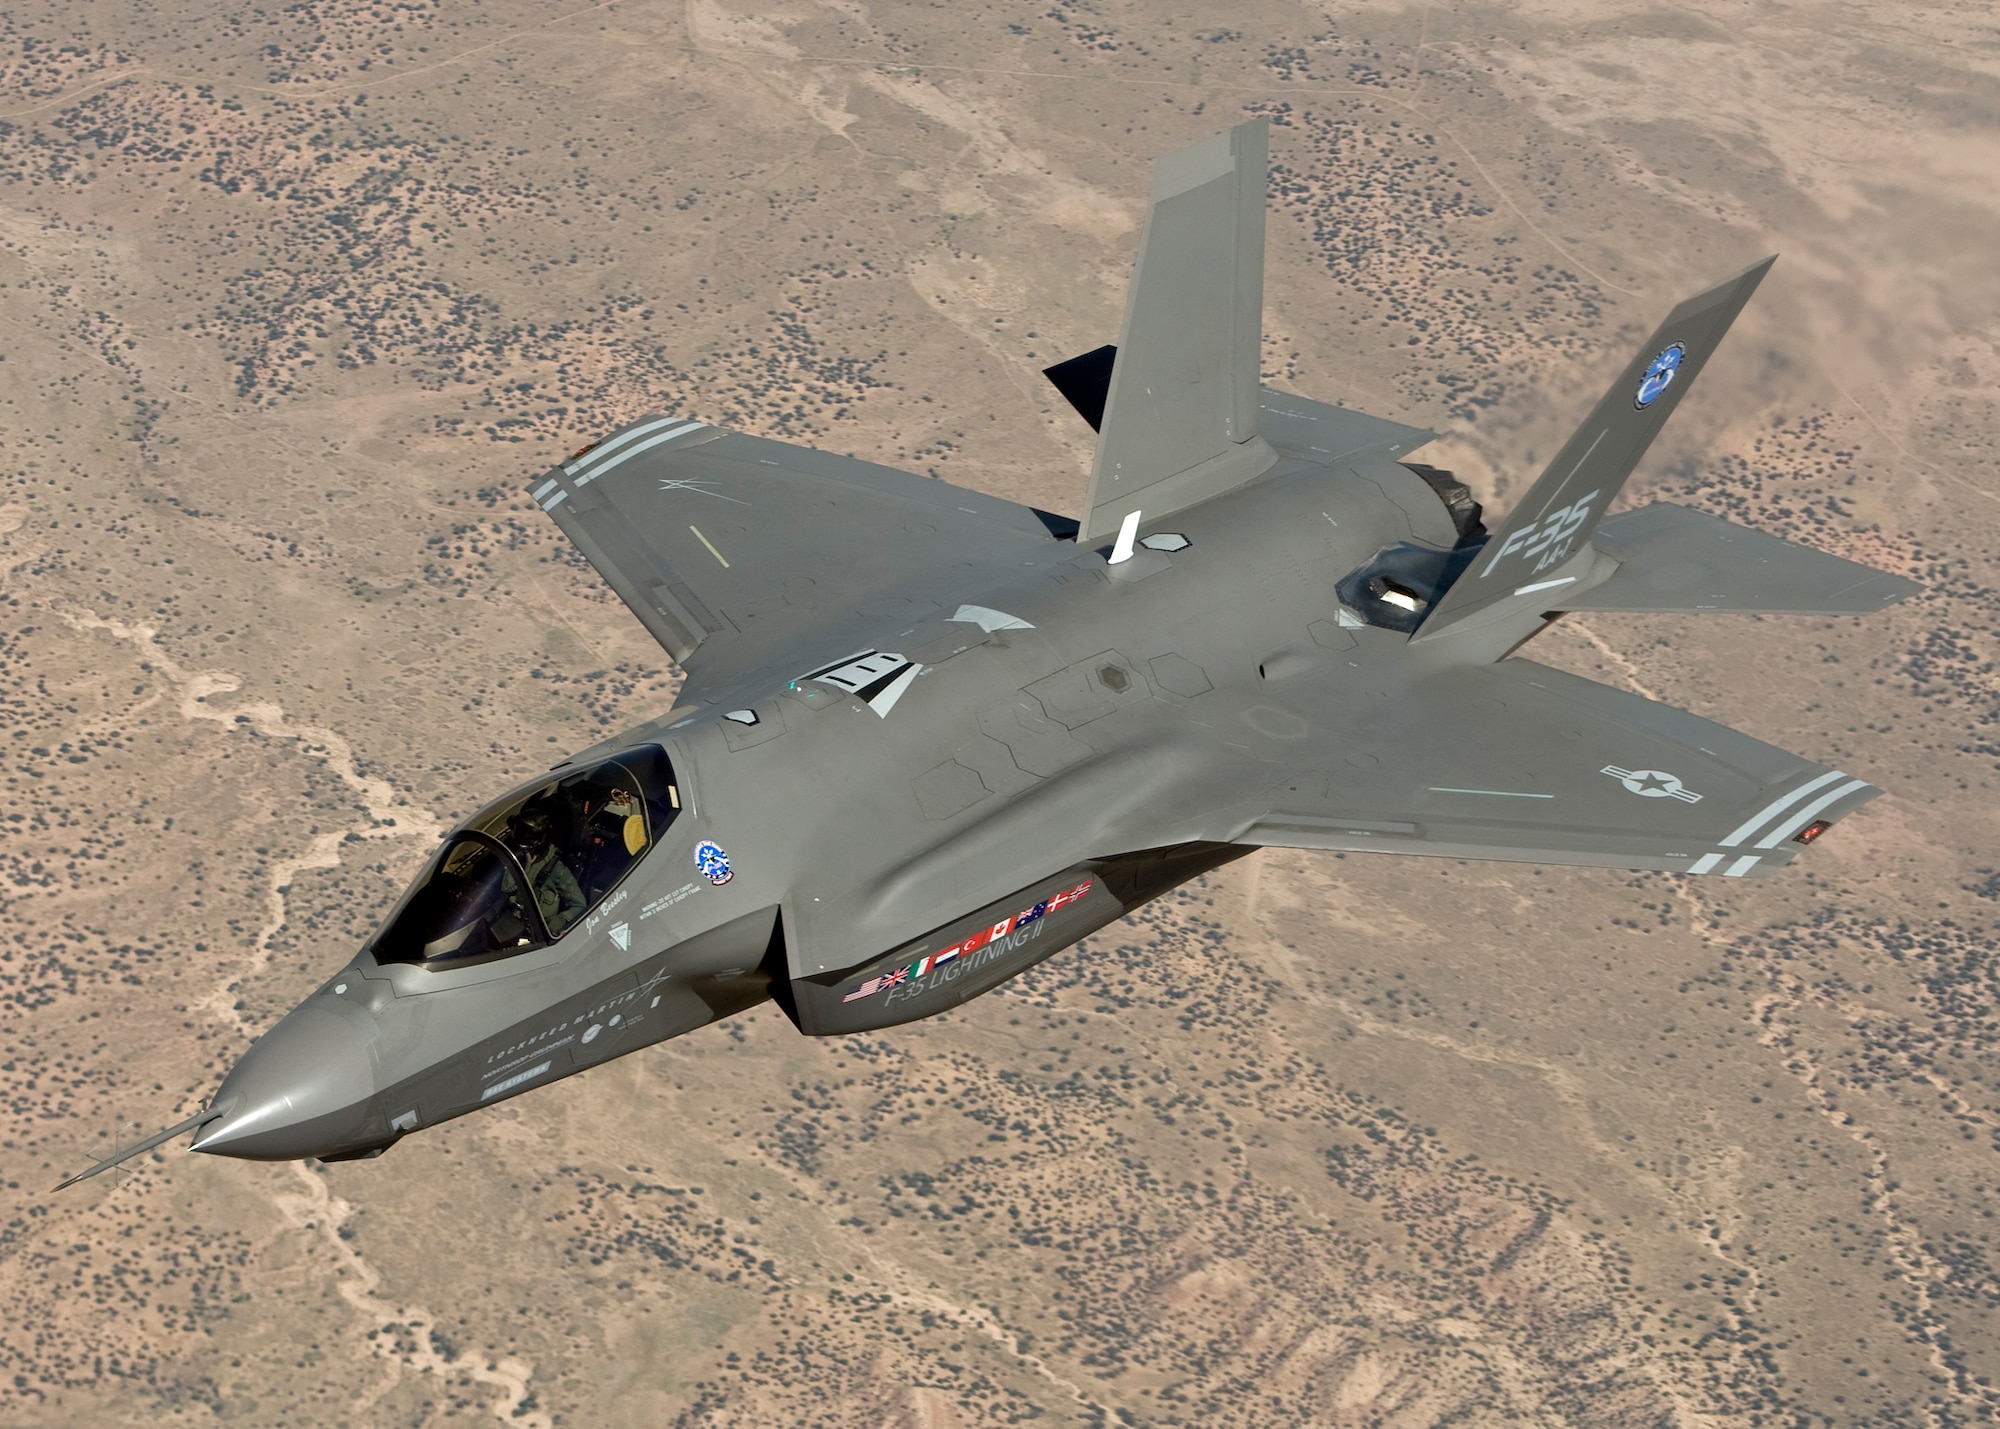 HILL AIR FORCE BASE, Utah - The Air Force is hosting local hearings in Layton, Ogden and West Wendover, Nev., May 1-3 2012, to provide the public an opportunity to comment on the analysis and findings of the Draft F-35A Operational Basing Environmental Impact Statement.